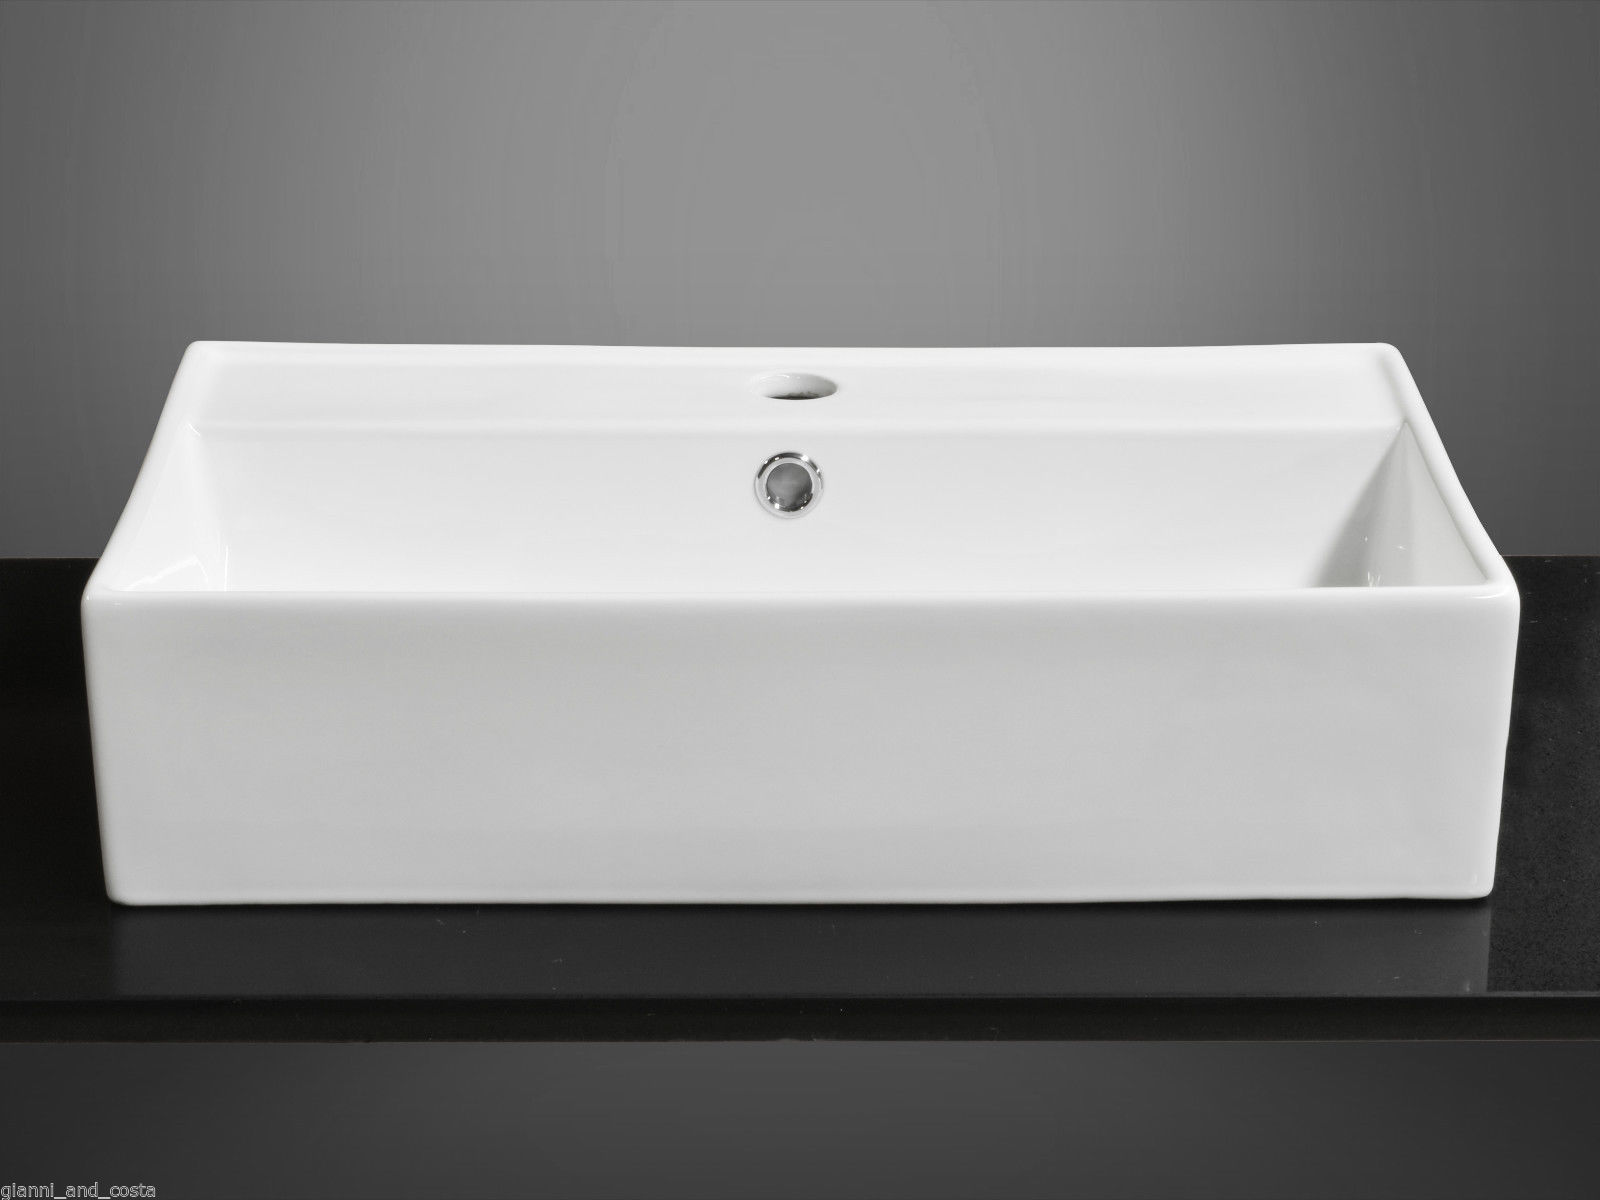  CERAMIC RECTANGULAR ABOVE COUNTER TOP BASIN INCLUDES POP-UP WASTE